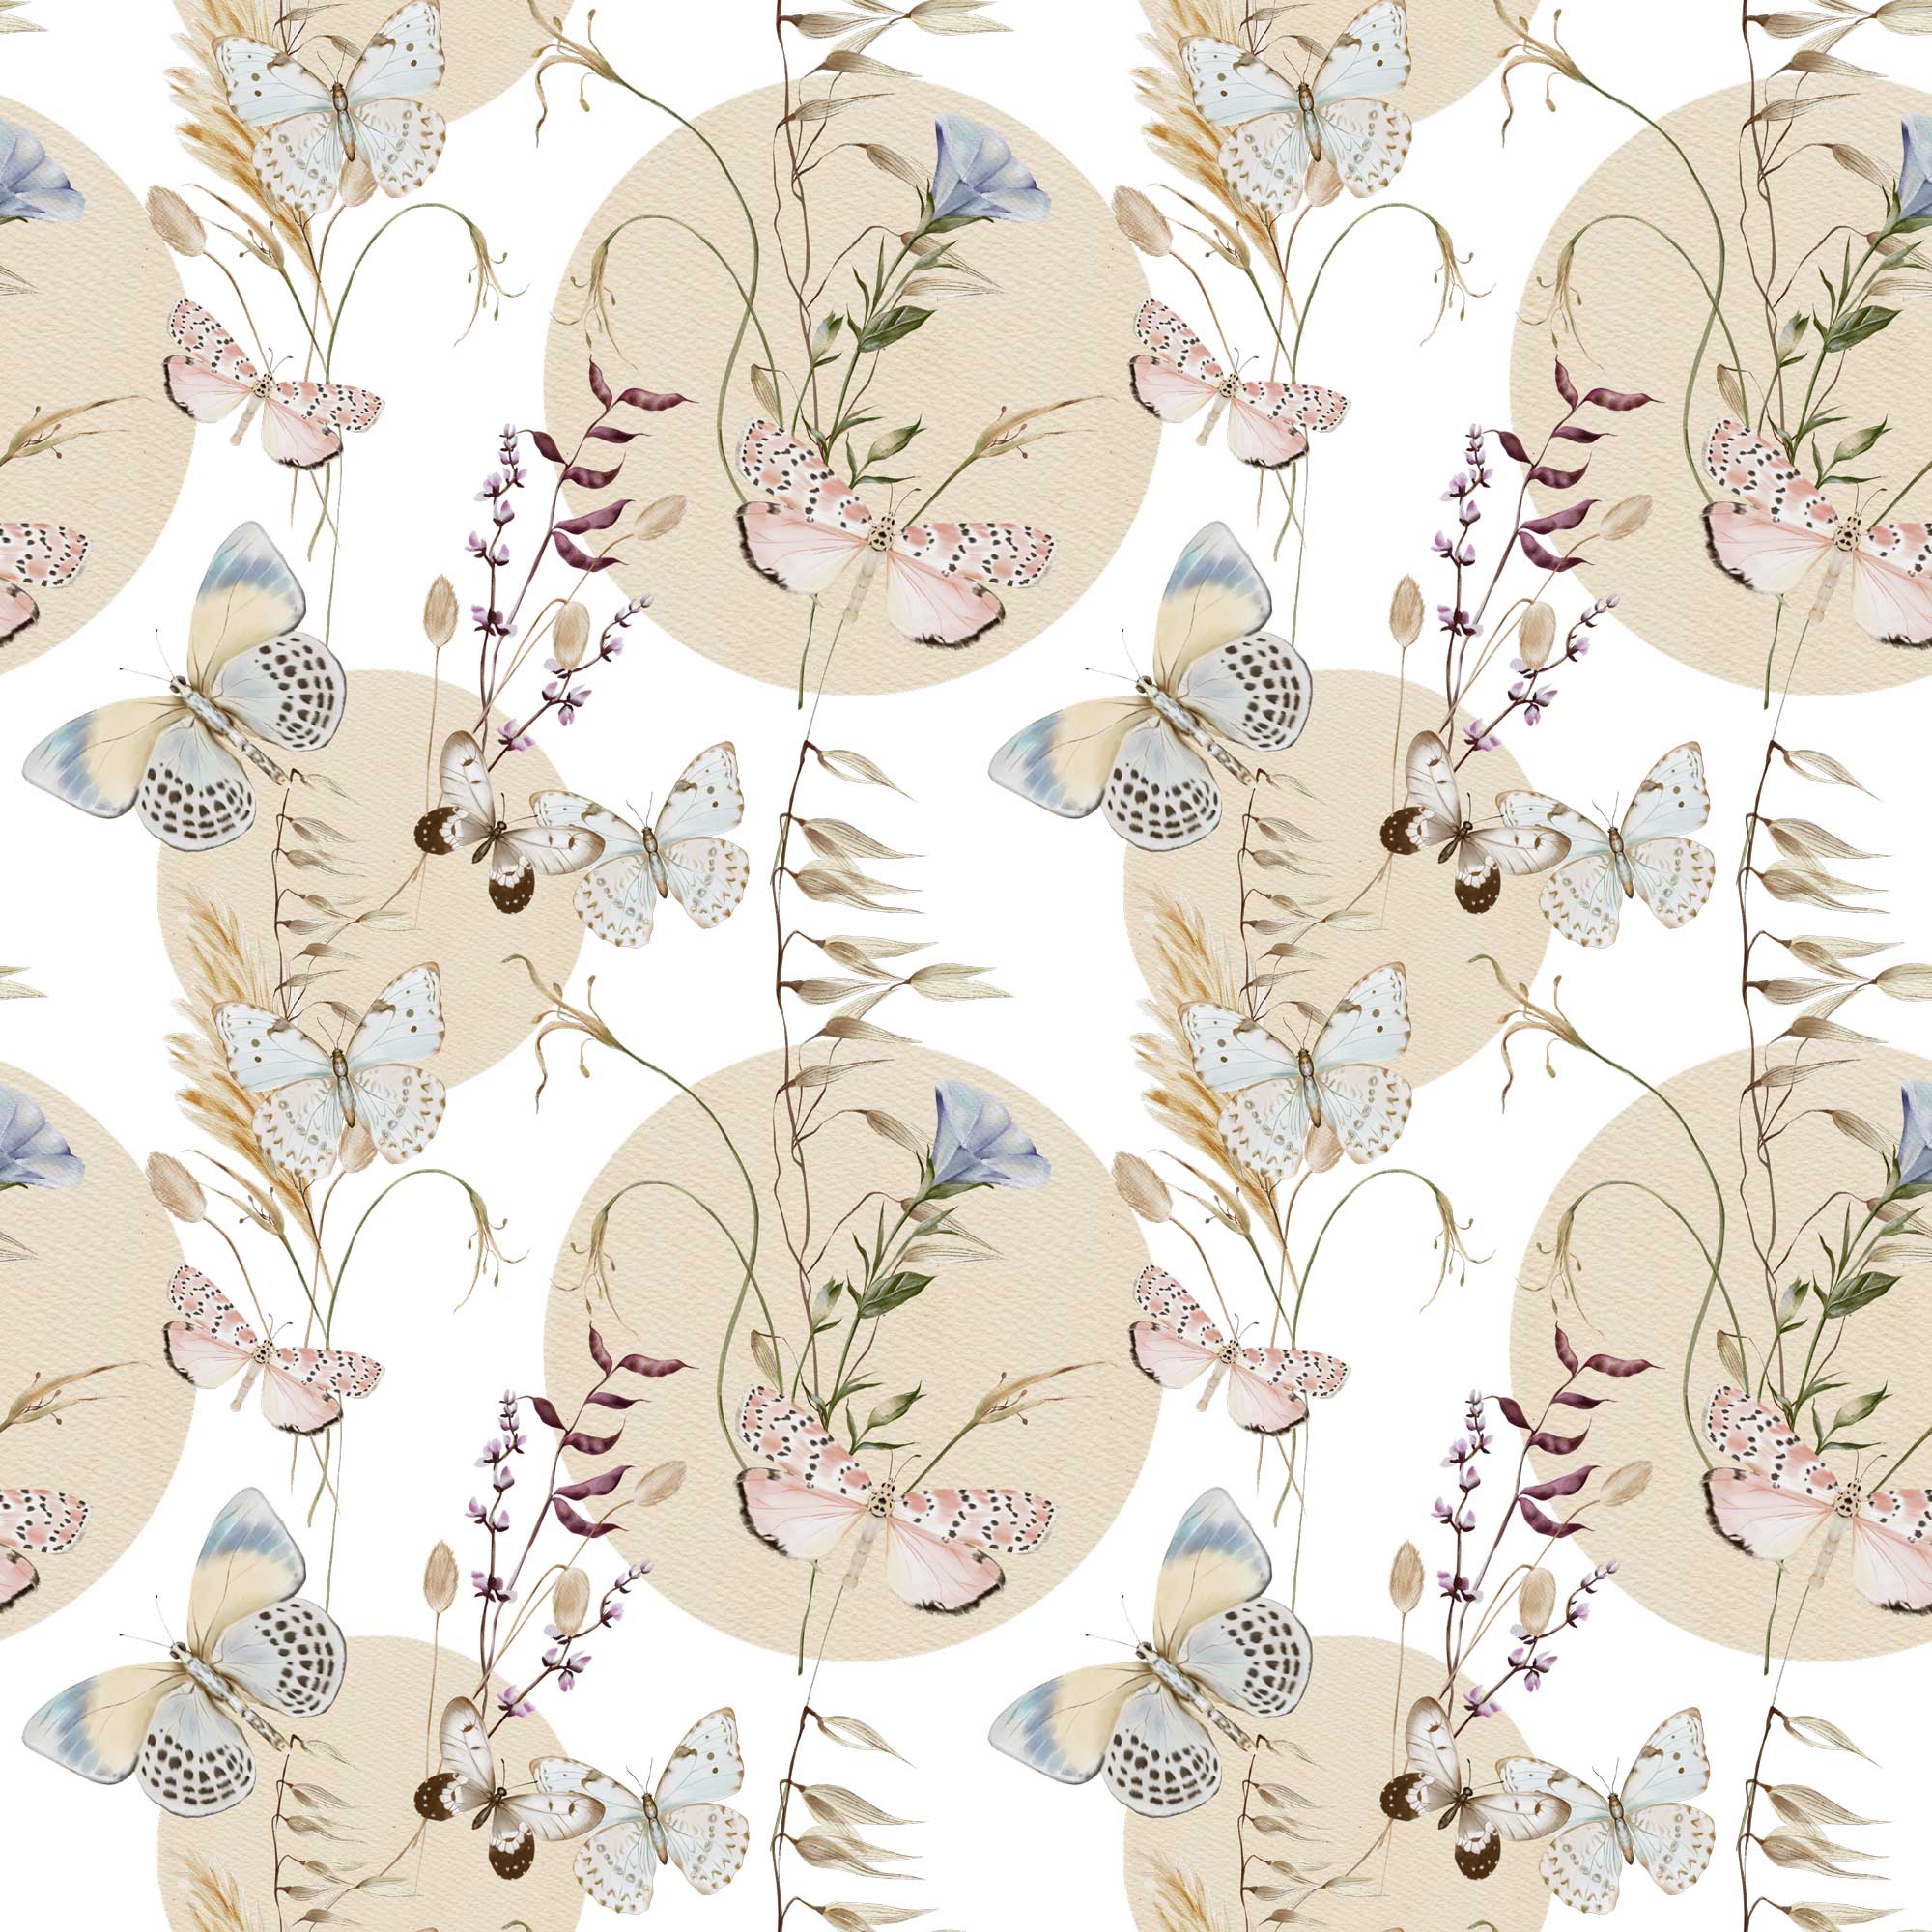 Fluttering Butterflies Among the Moon - Wrapping Paper